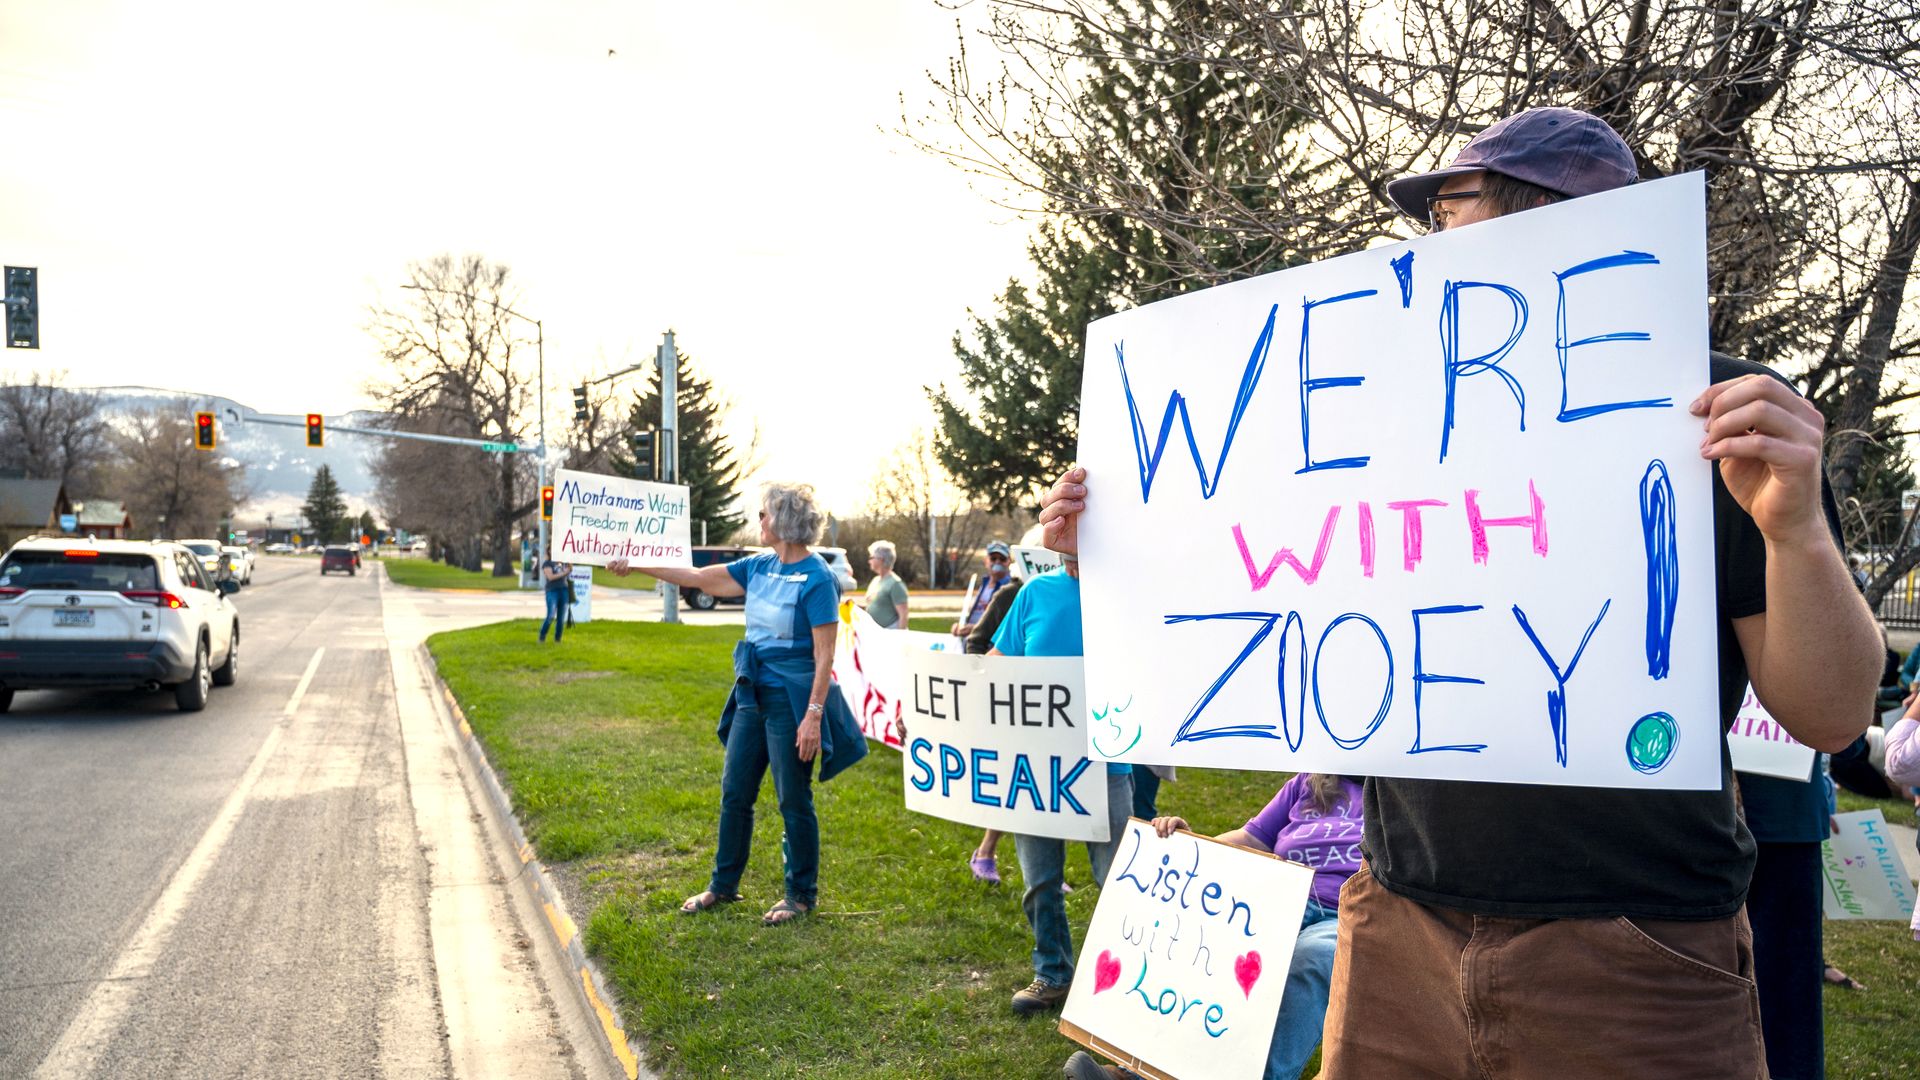 Supporters hold signs near a rally in support of transgender lawmaker Zooey Zephyr